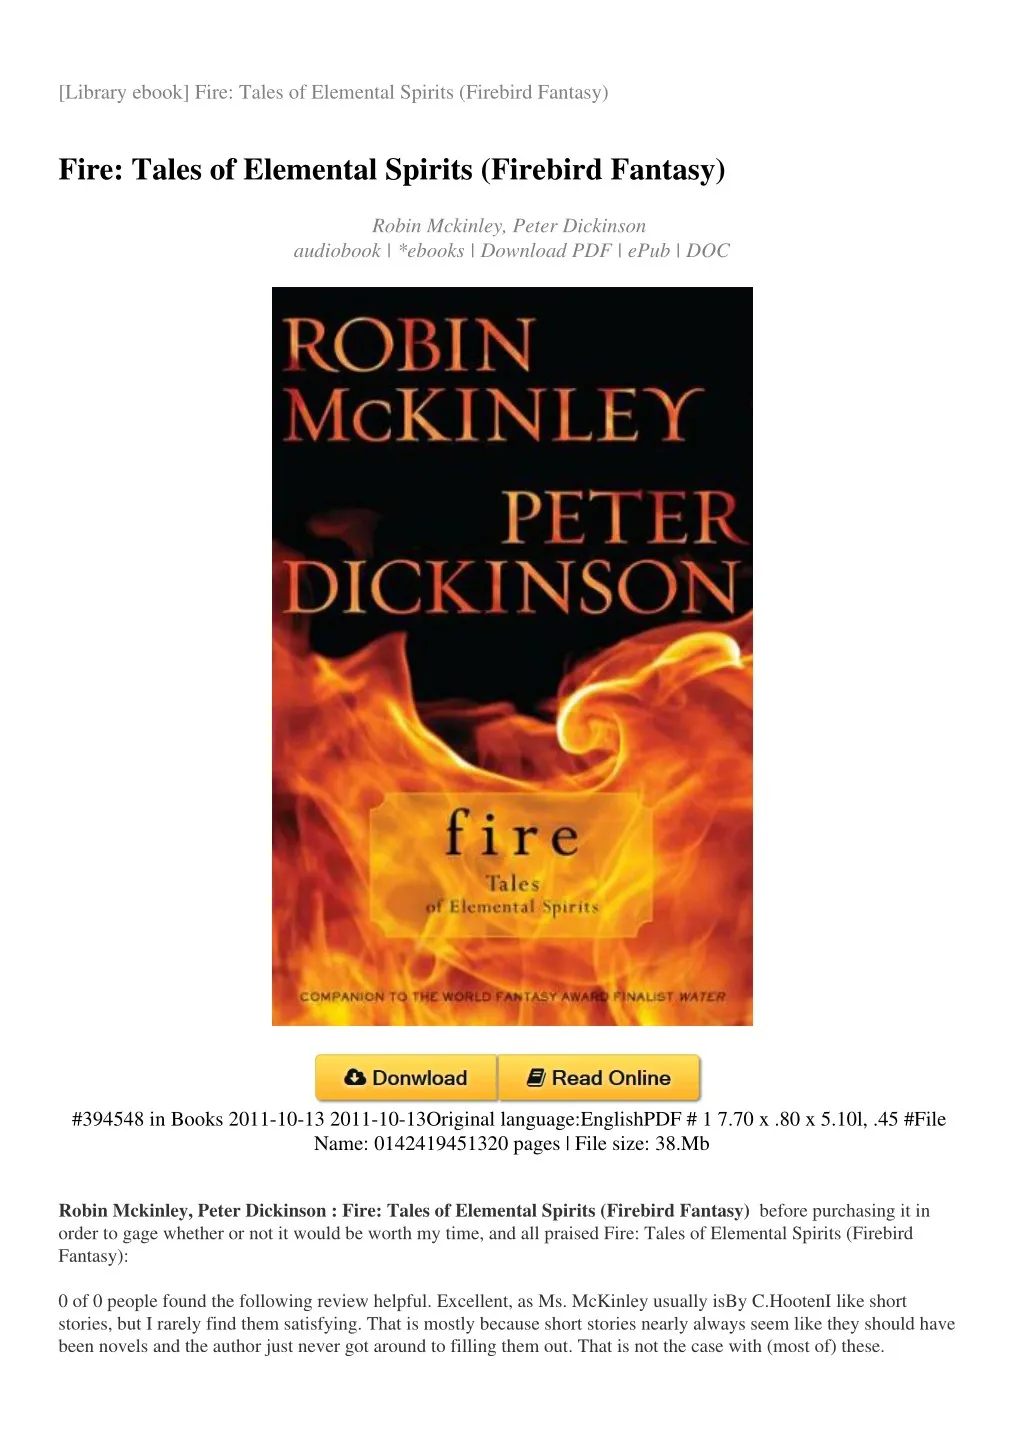 library ebook fire tales of elemental spirits